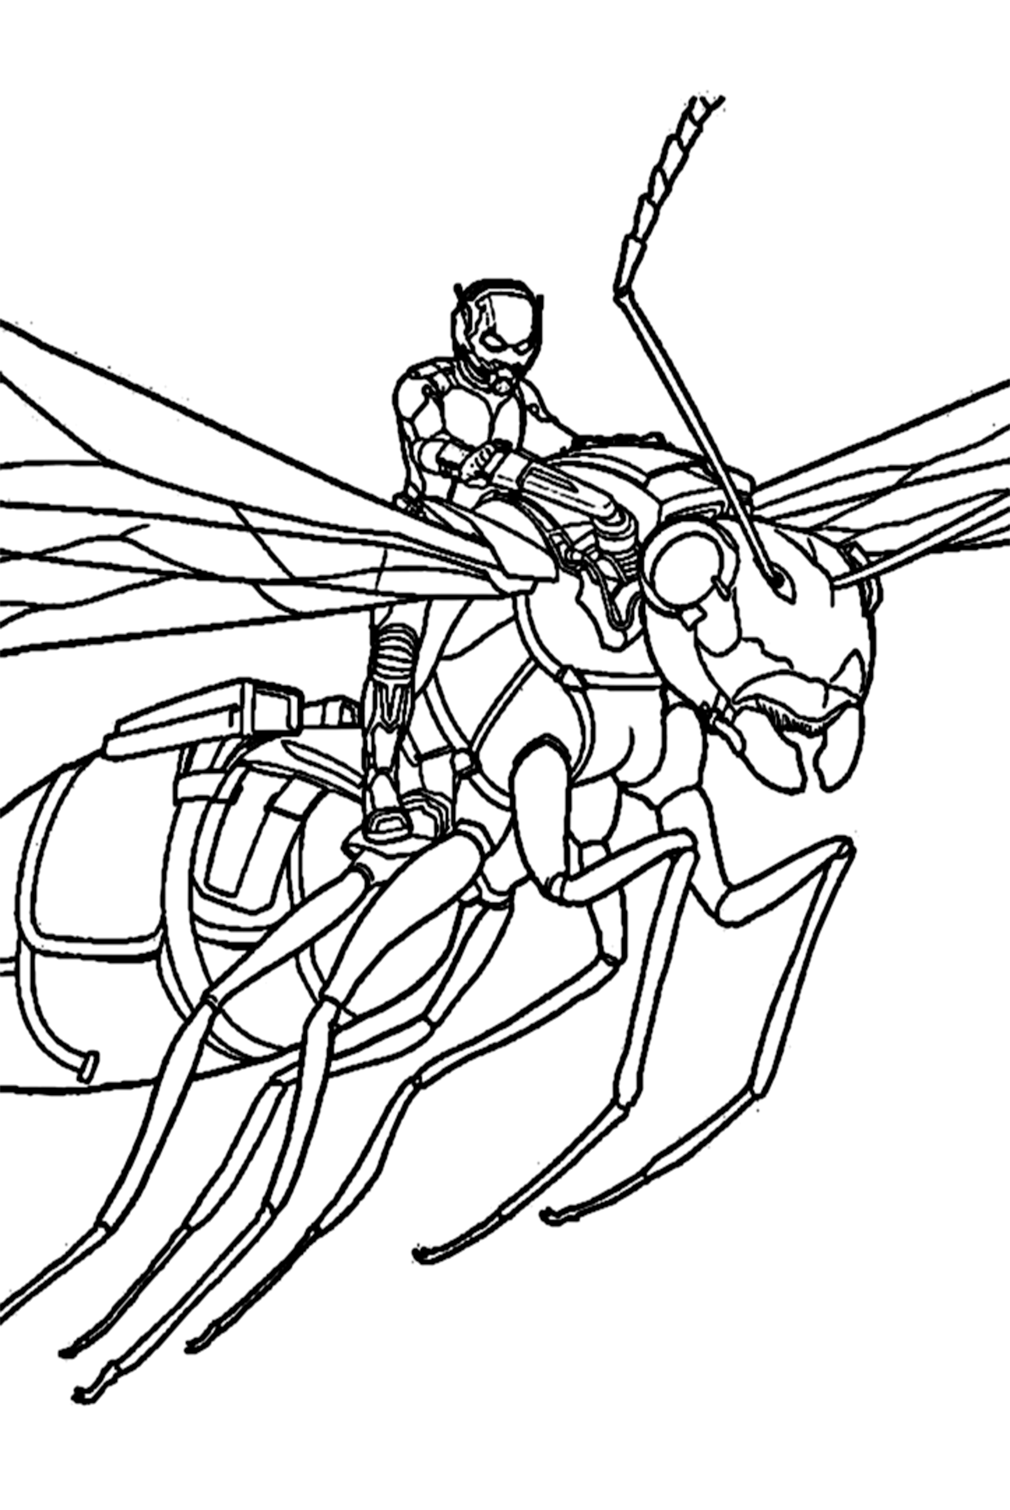 Ant-man Riding The Wasp Coloring Page